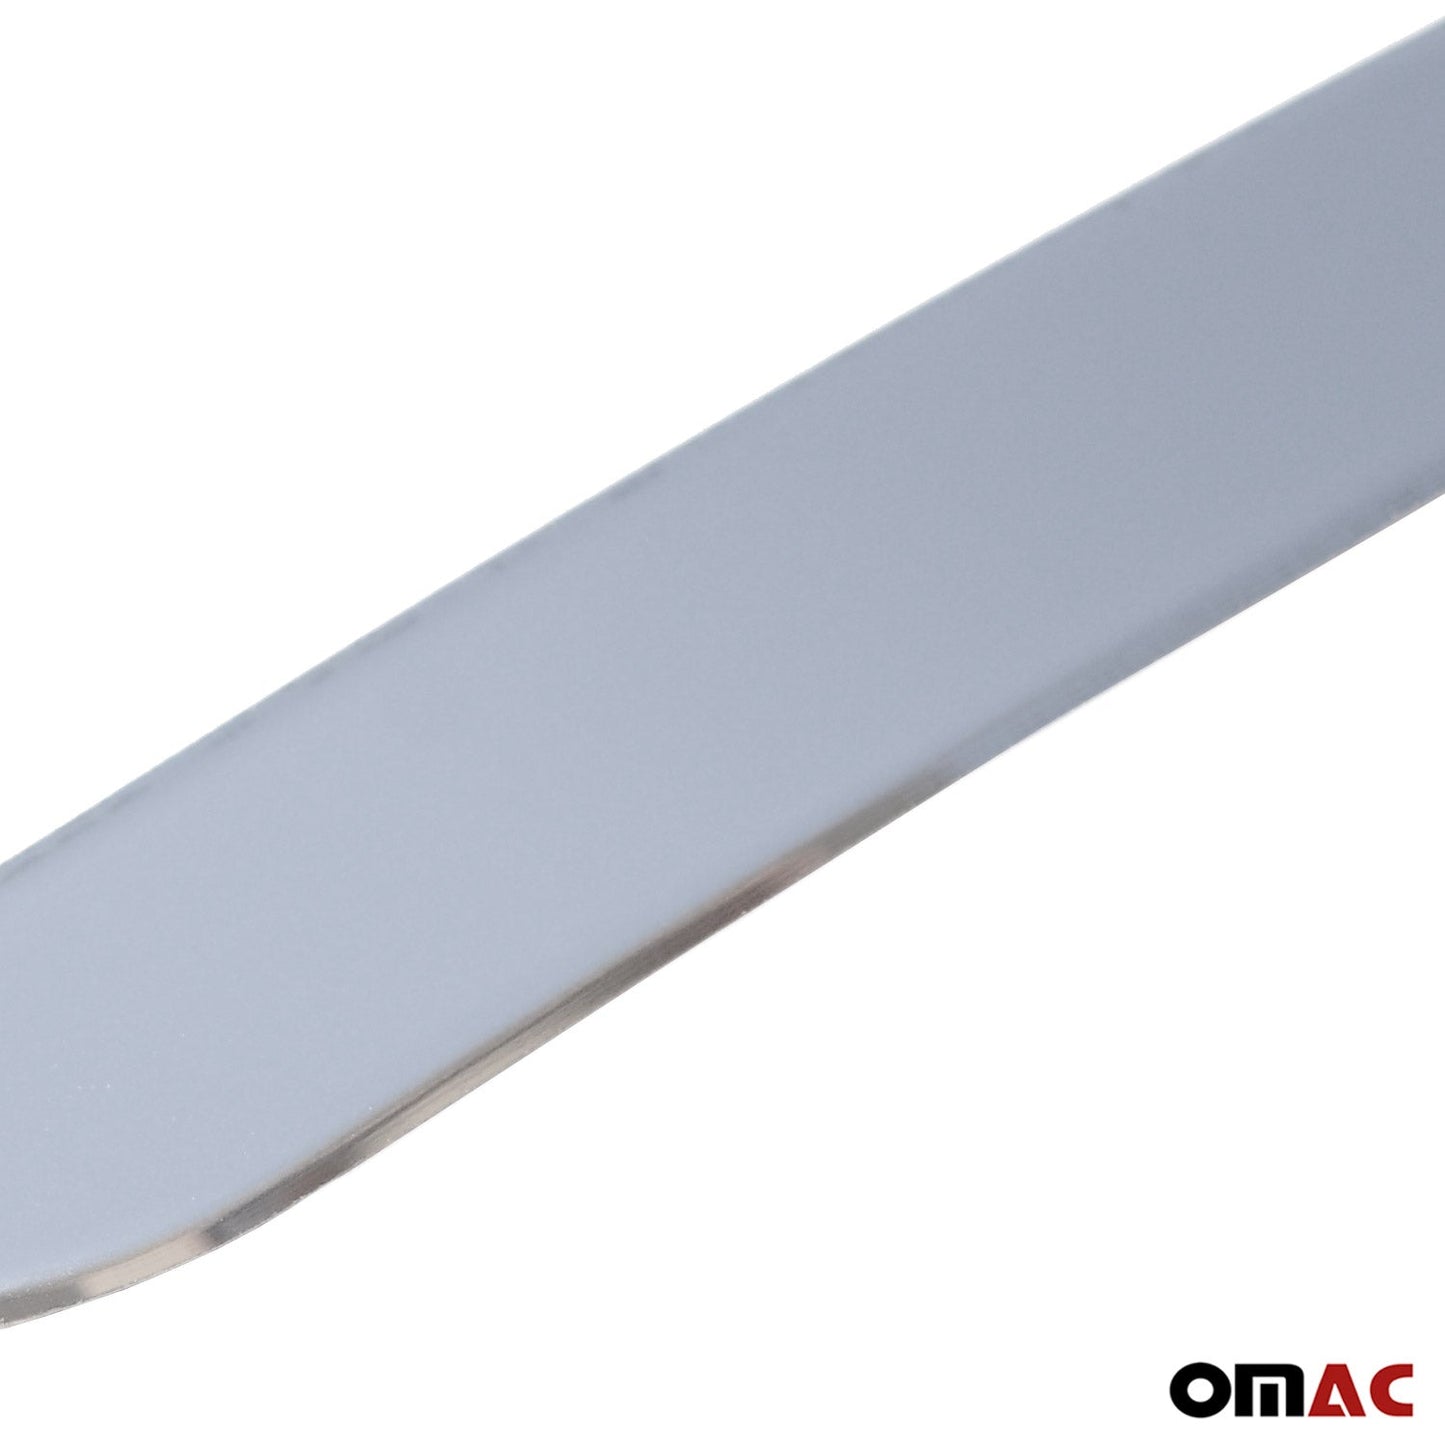 OMAC Rear Trunk Molding Trim for Subaru Forester 2009-2013 Stainless Steel Silver 6803052